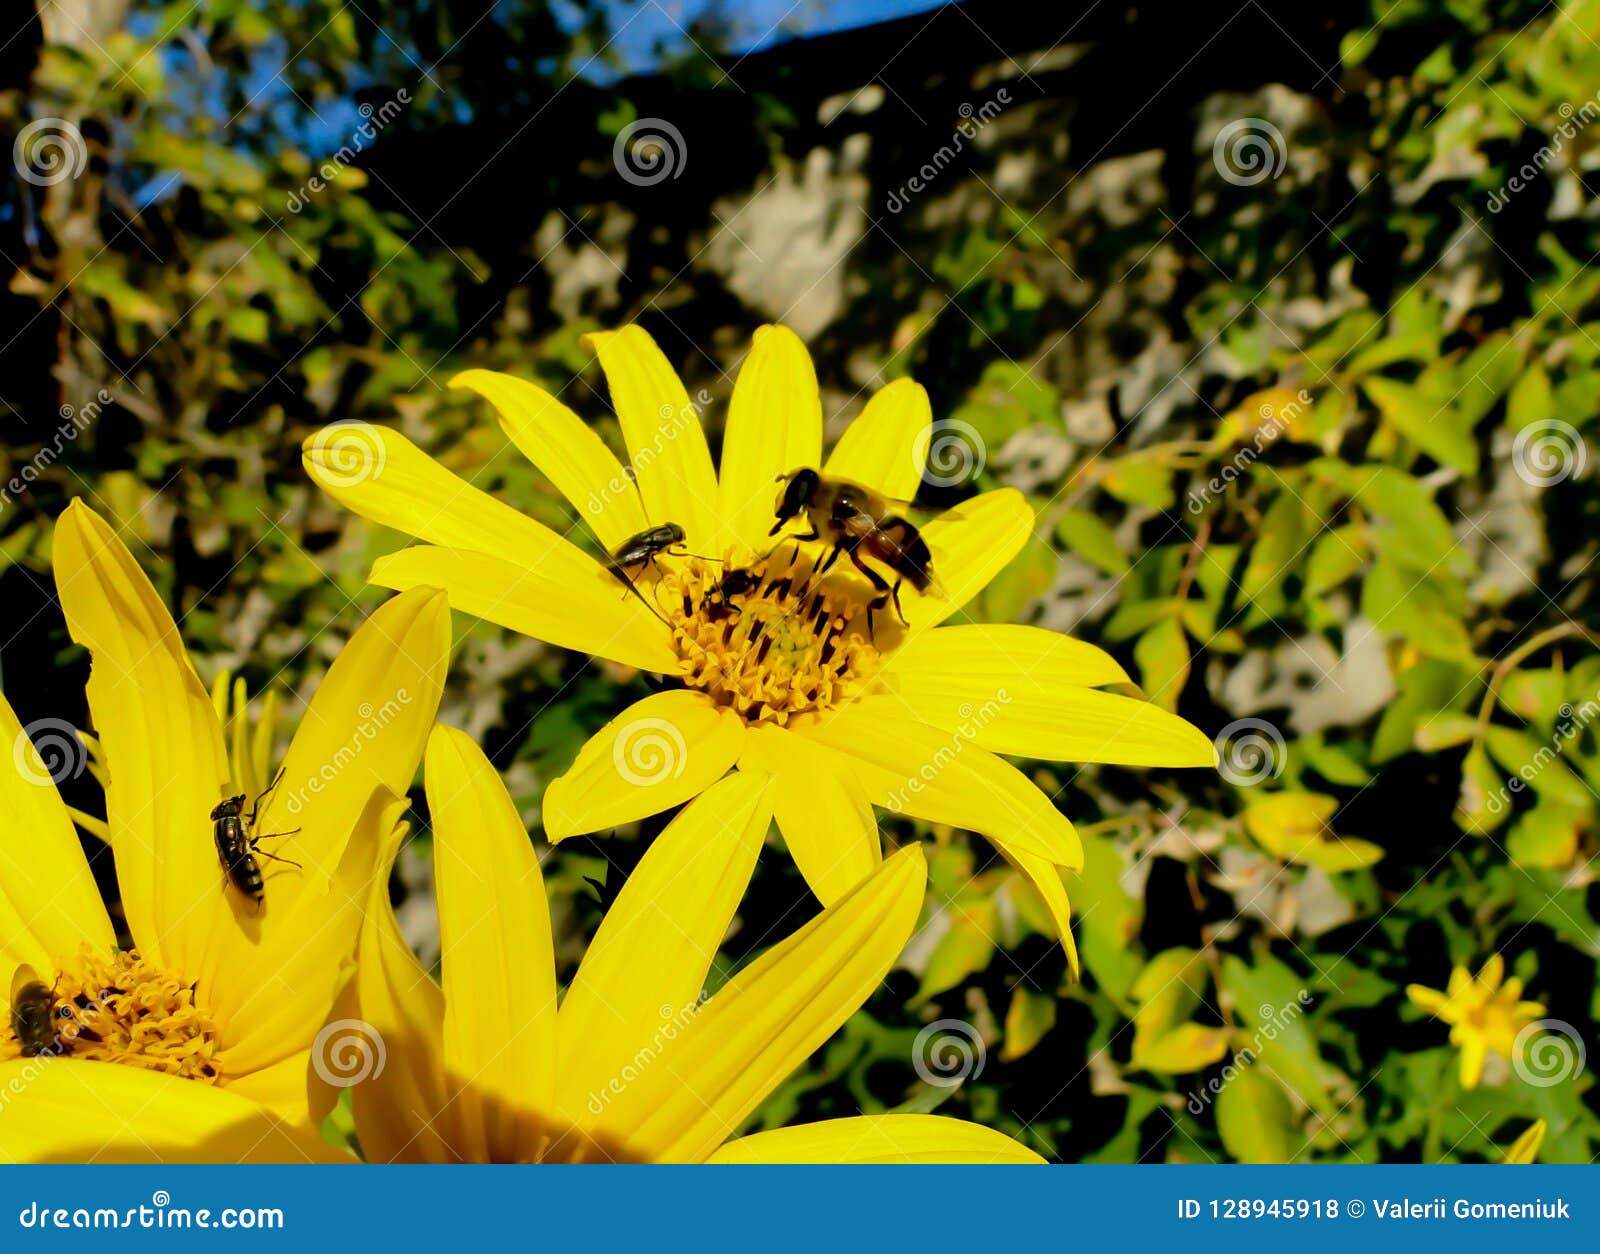 bee and fly on a girasol flower